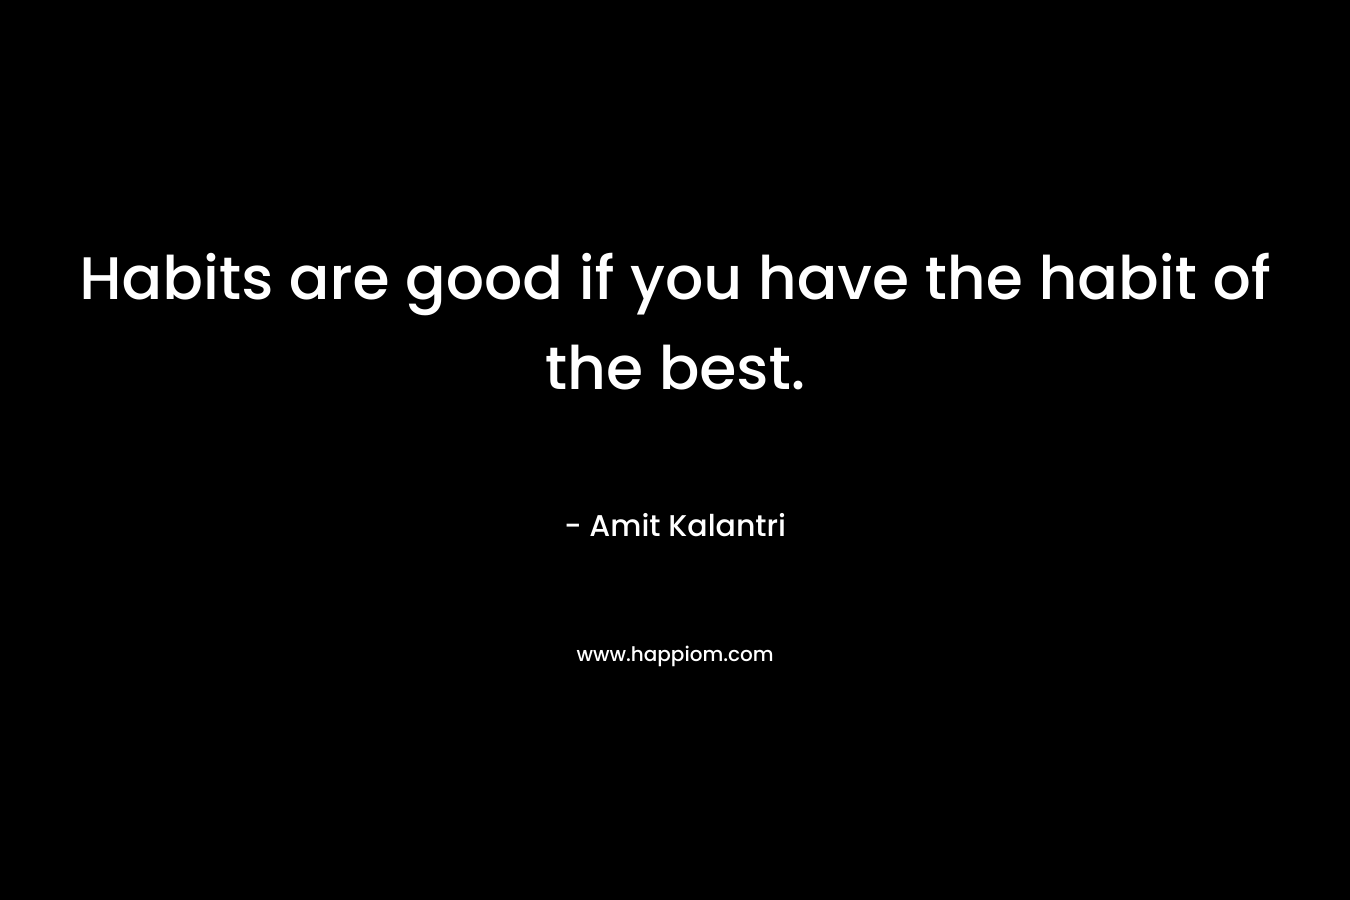 Habits are good if you have the habit of the best.